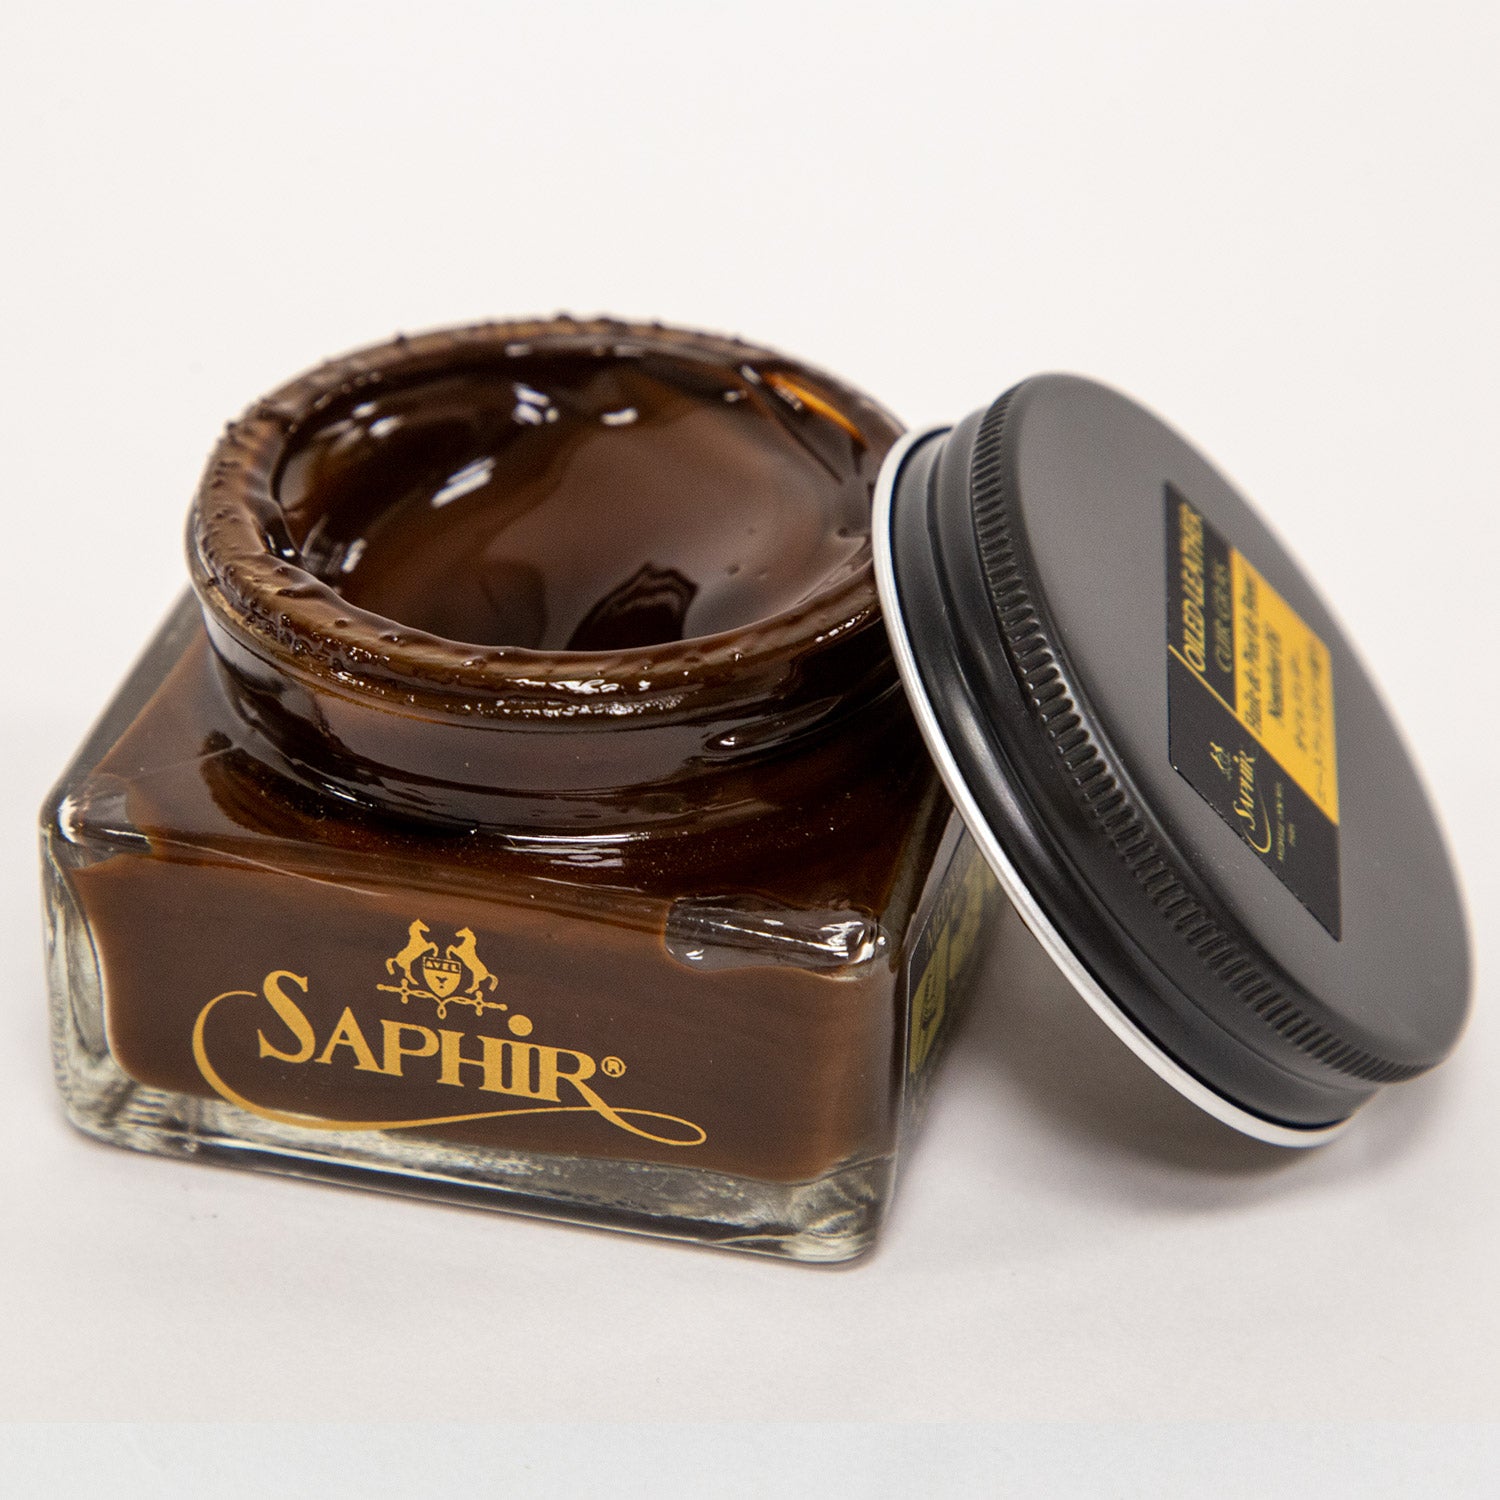 A jar of Saphir Medaille d'Or Oiled Leather Cream for Chromexcel made by KirbyAllison.com sitting on top of a white surface.